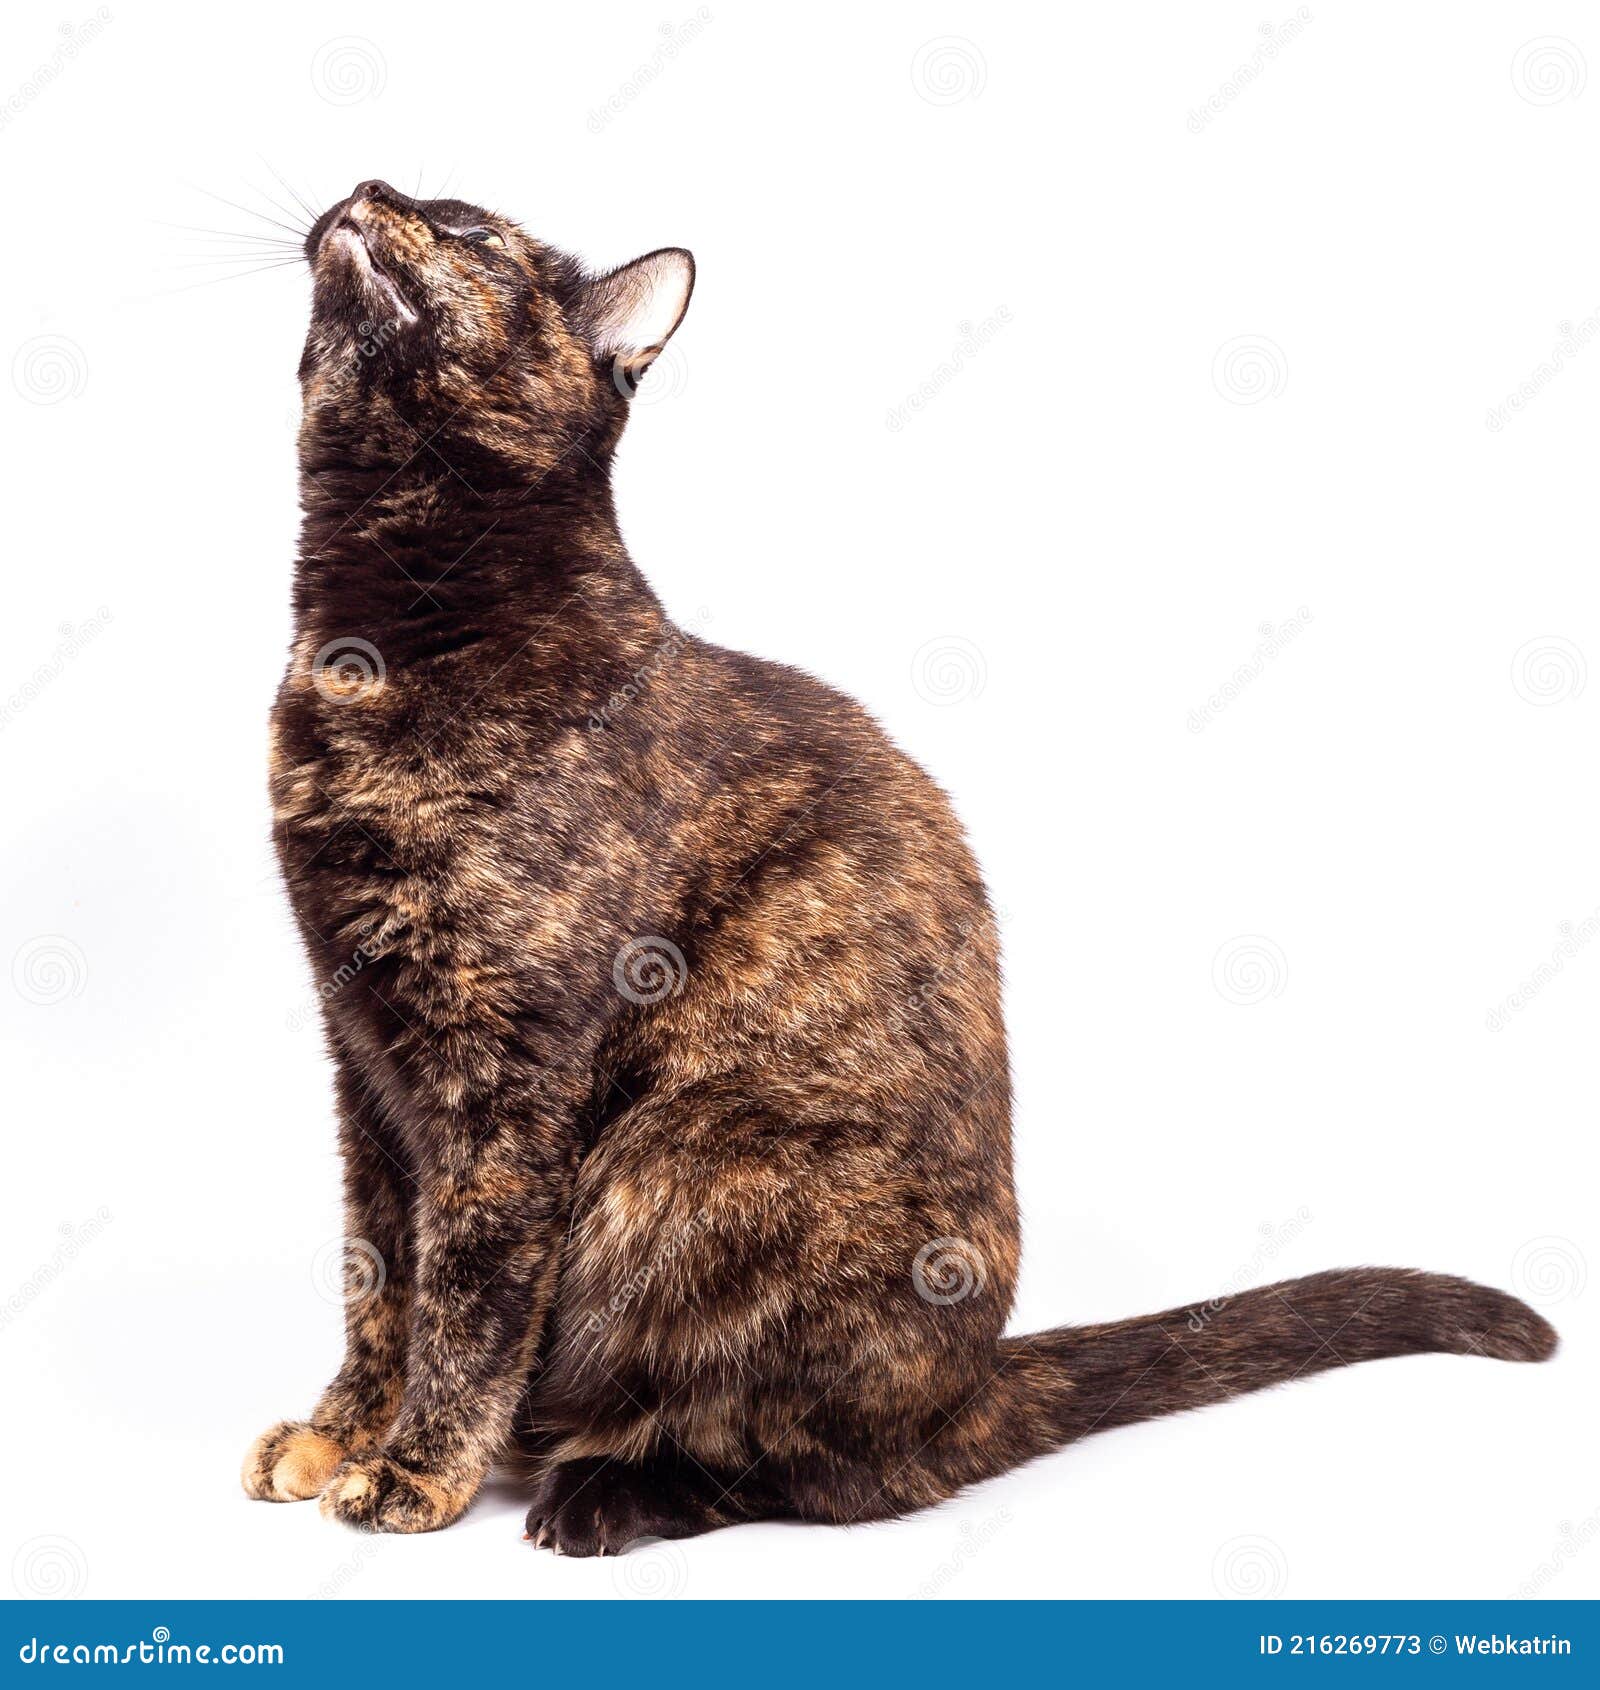 Le Chat Animal De Compagnie Greeneyed Tortoiseshell Prend Une